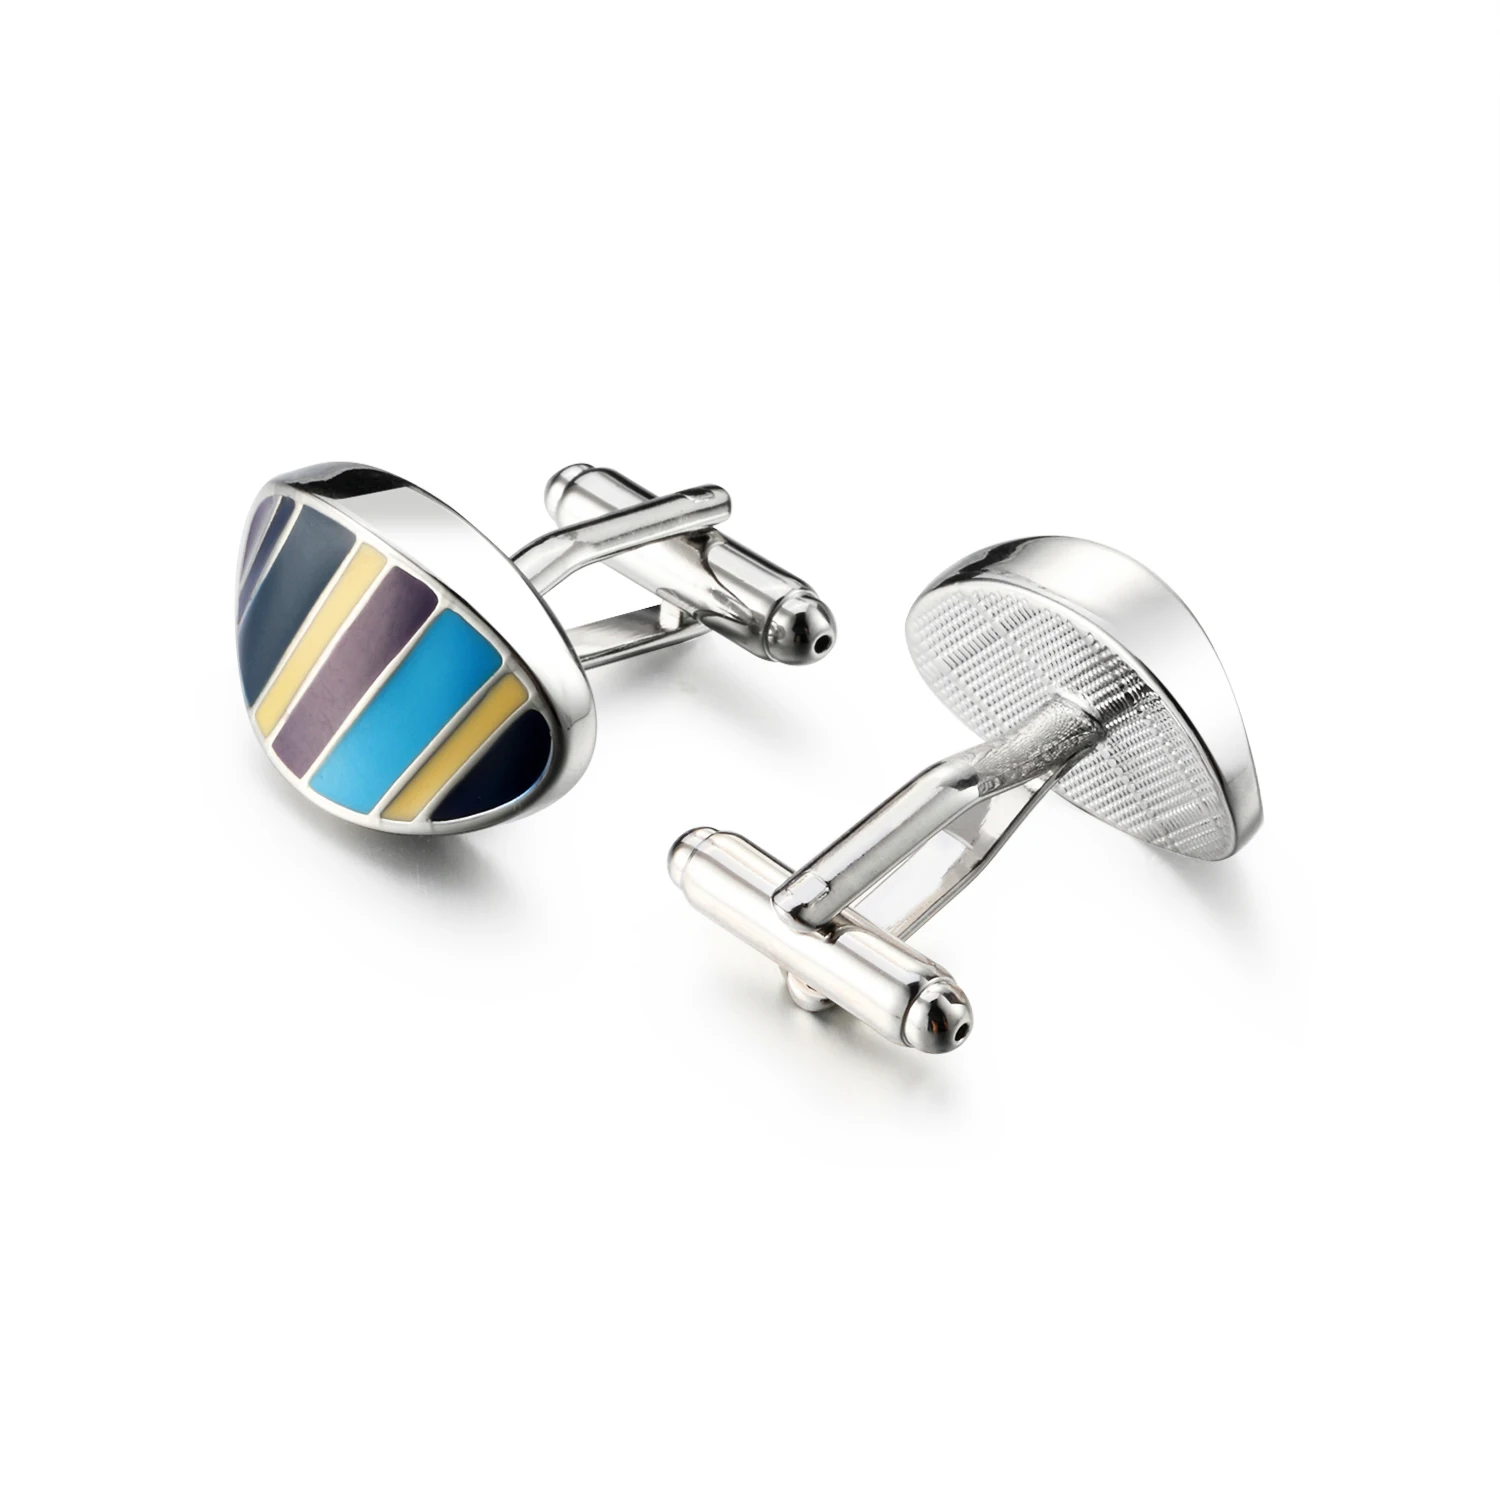 

O.B.Jewelry-Retail Custom Men Jewelry Silver Color Metal Cuff Links Wholesale Price Oval Shaped Cufflinks For Men, Picture